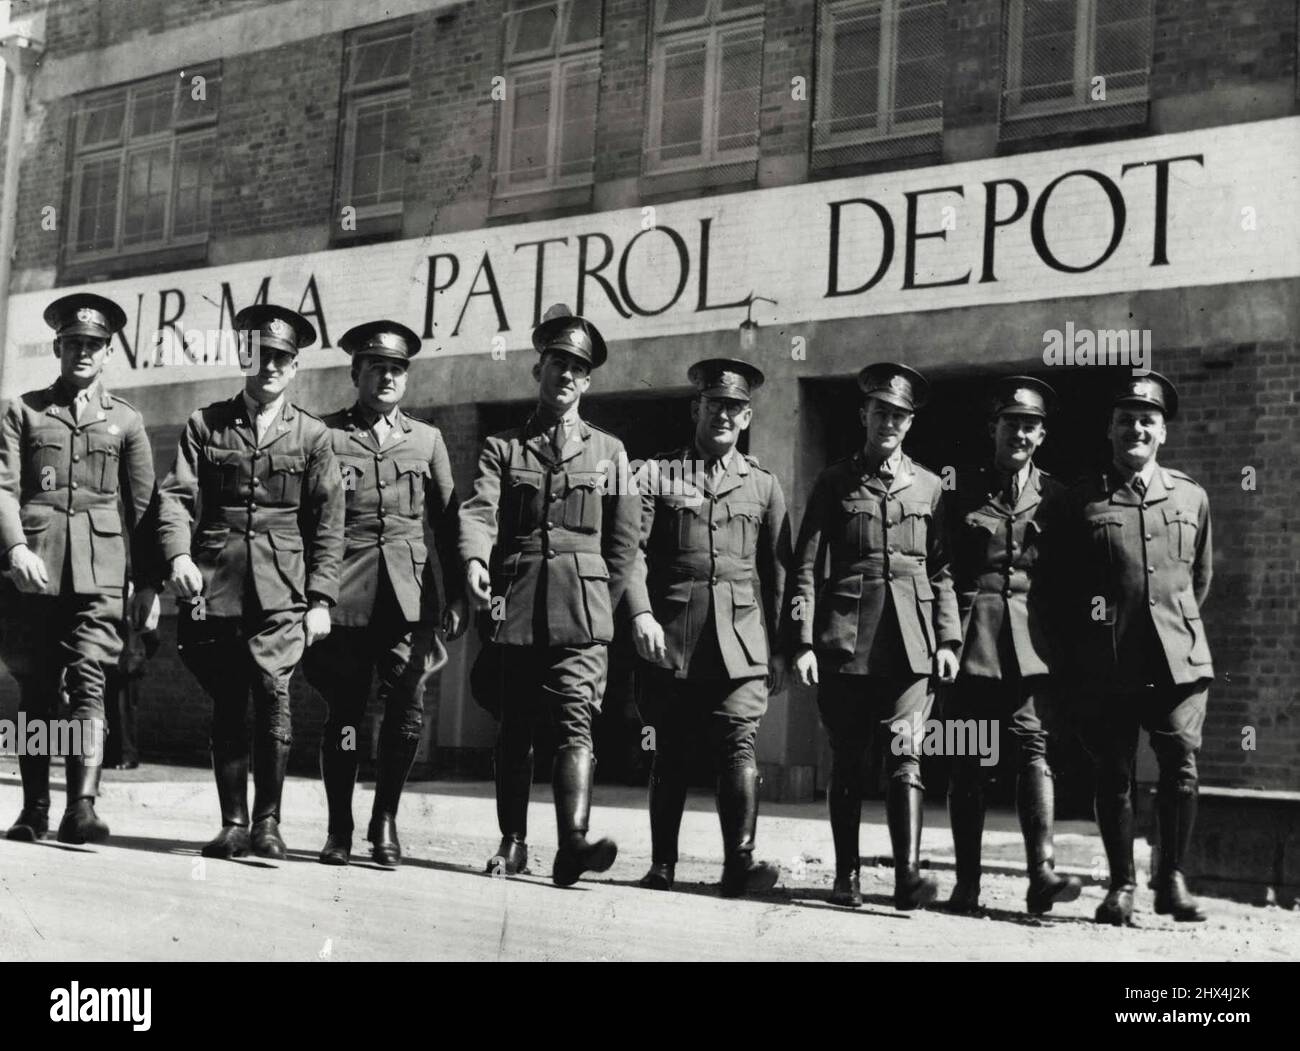 President of the N.R.M.A. (Mr. J. C. Watson) officially opened new patrol ***** of the association at Woollomooloo yesterday. Patrolmen leaving the building after the ceremony. September 17, 1937. Stock Photo